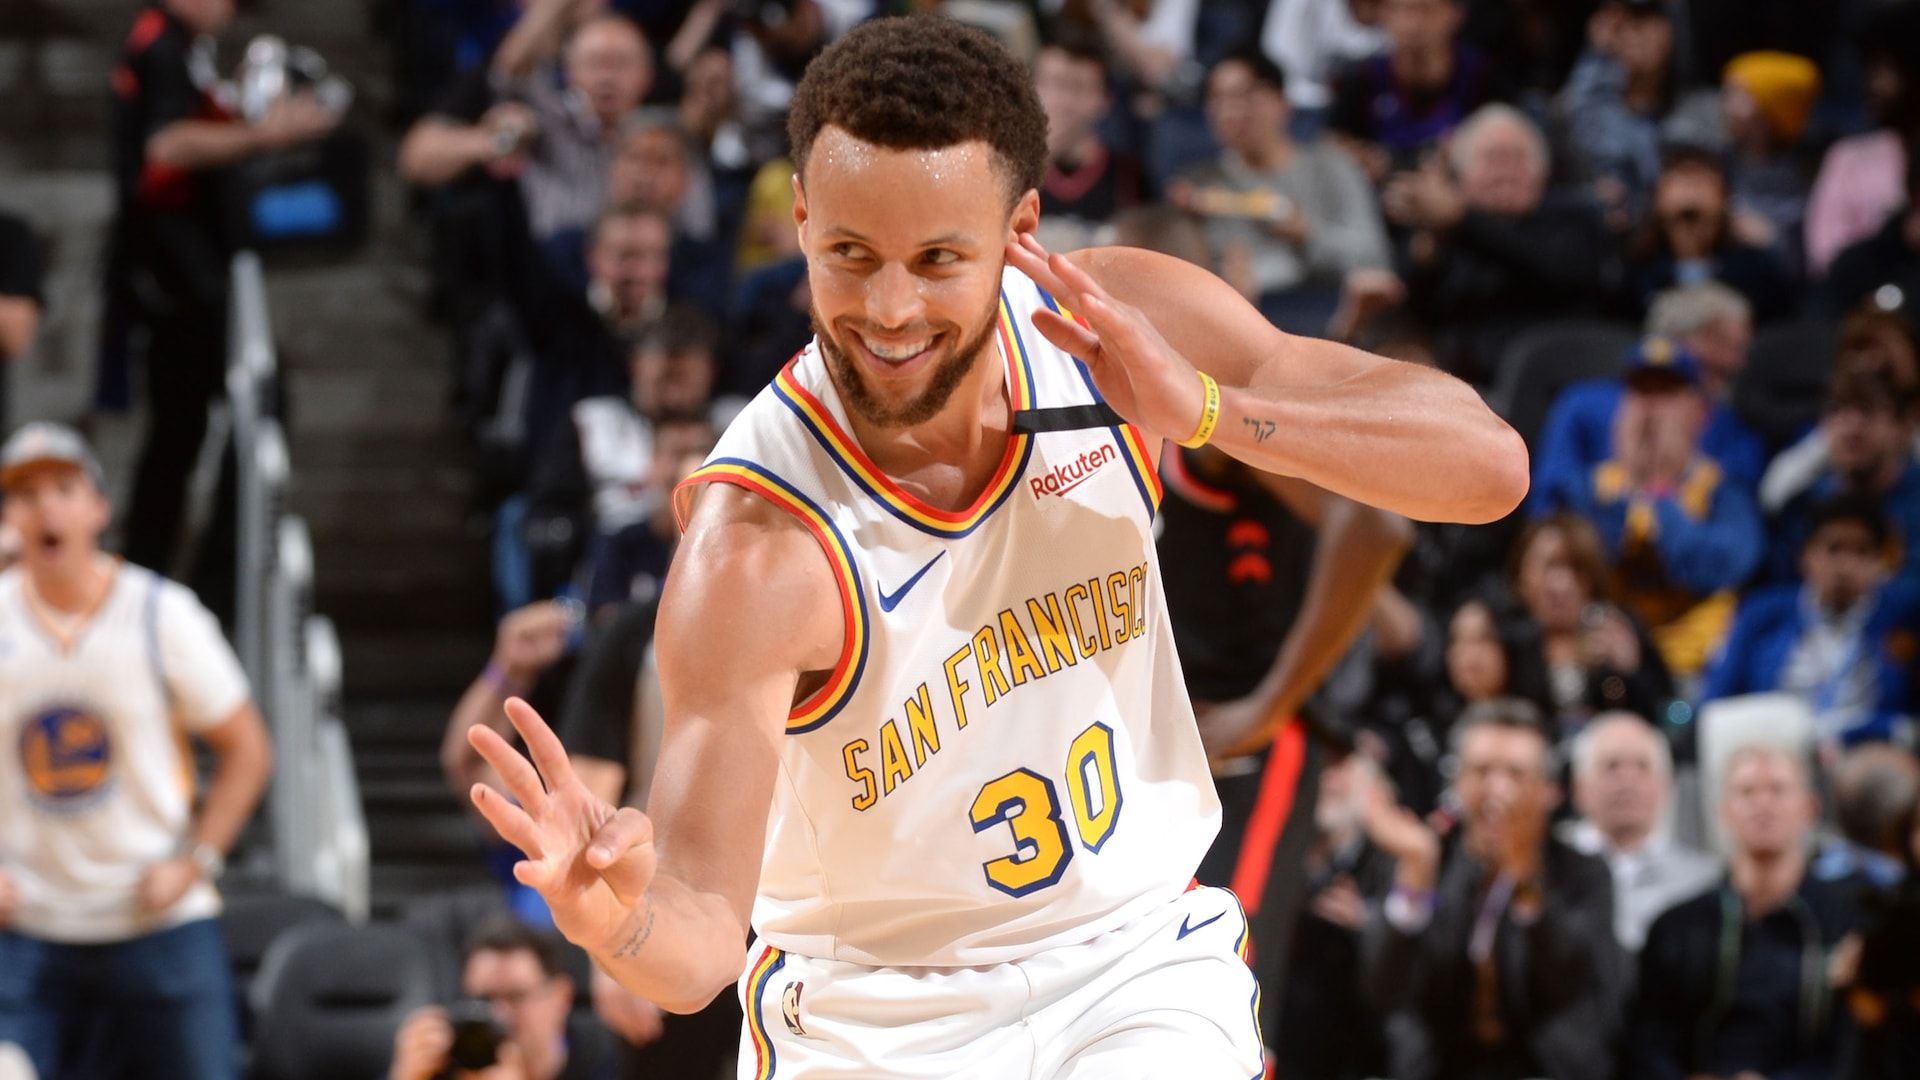 Stephen Curry electrifies crowd in return to Golden State.